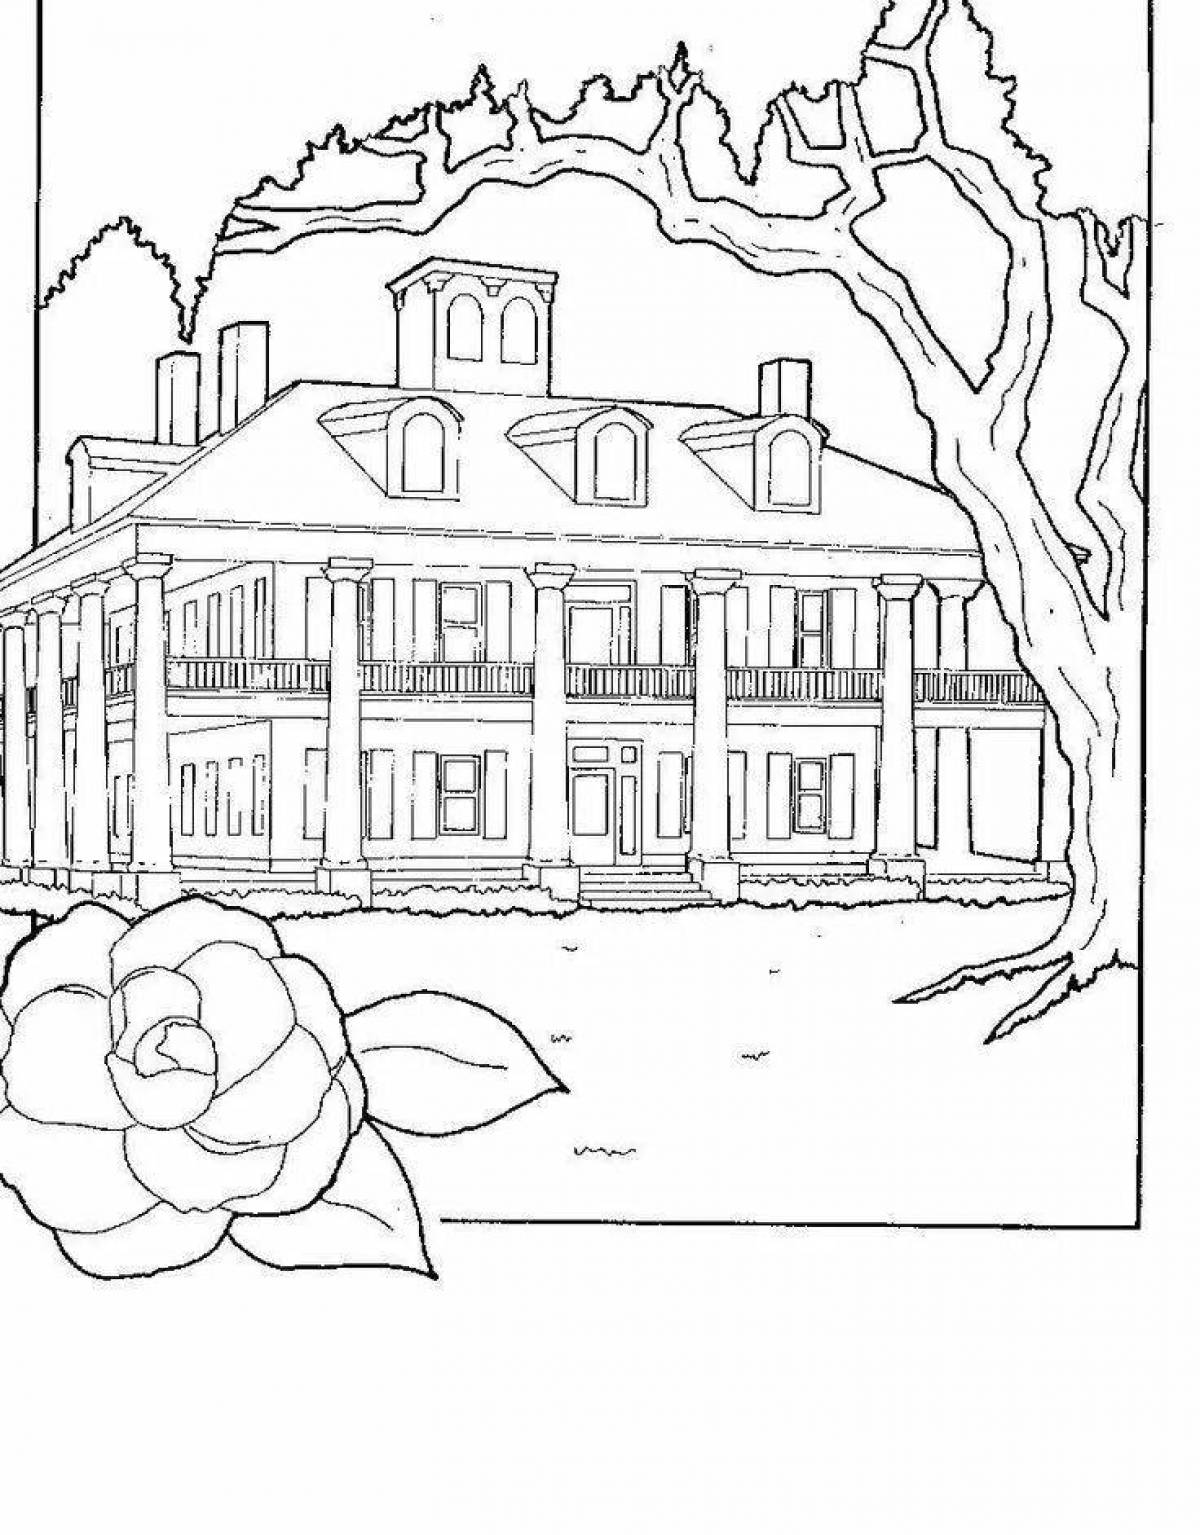 Charming hotel coloring book